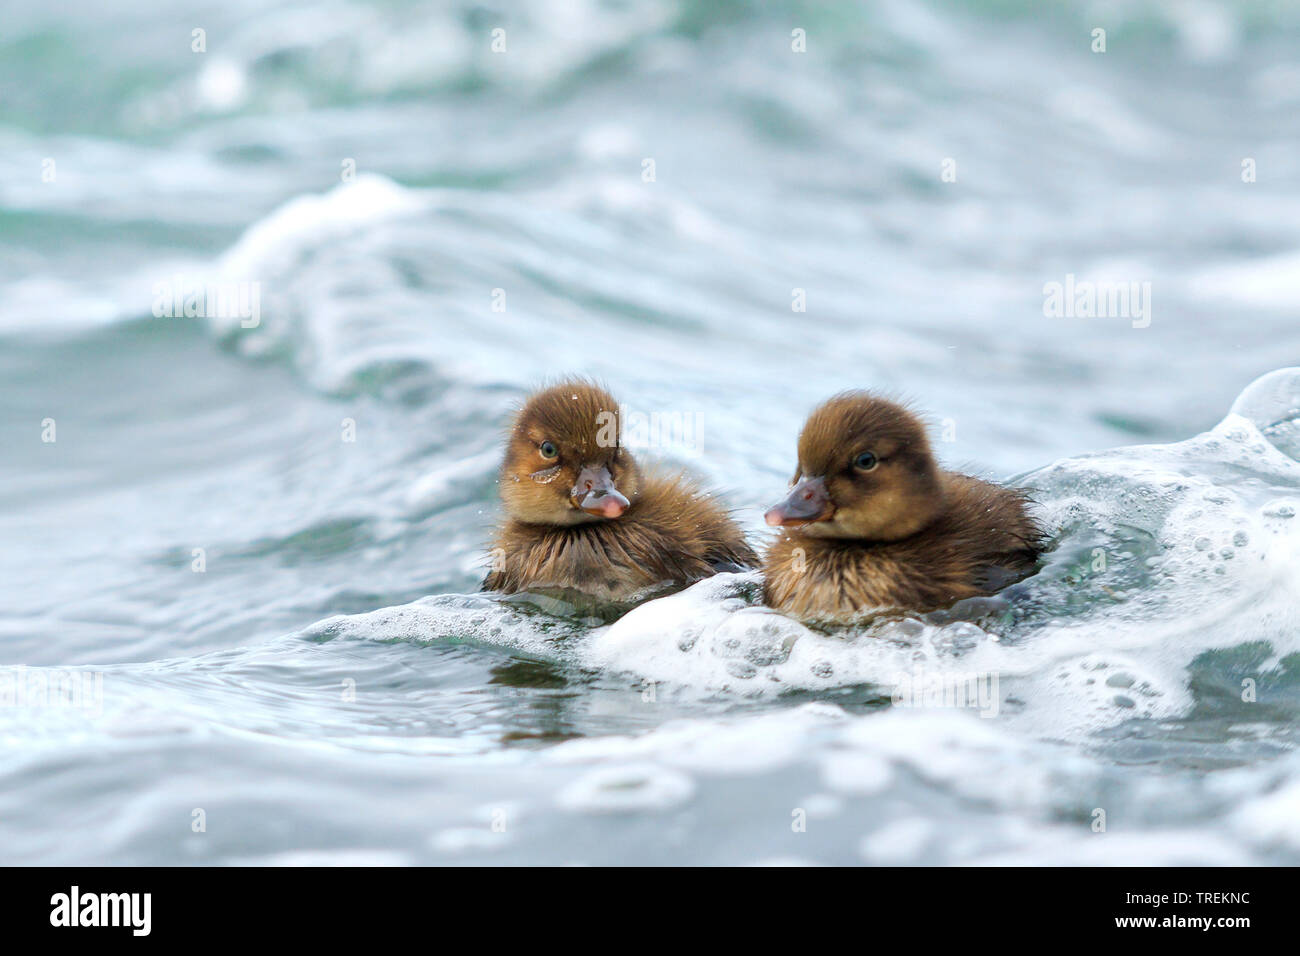 greater scaup (Aythya marila marila, Aythya marila), two swimming ducklings, front view, Iceland Stock Photo